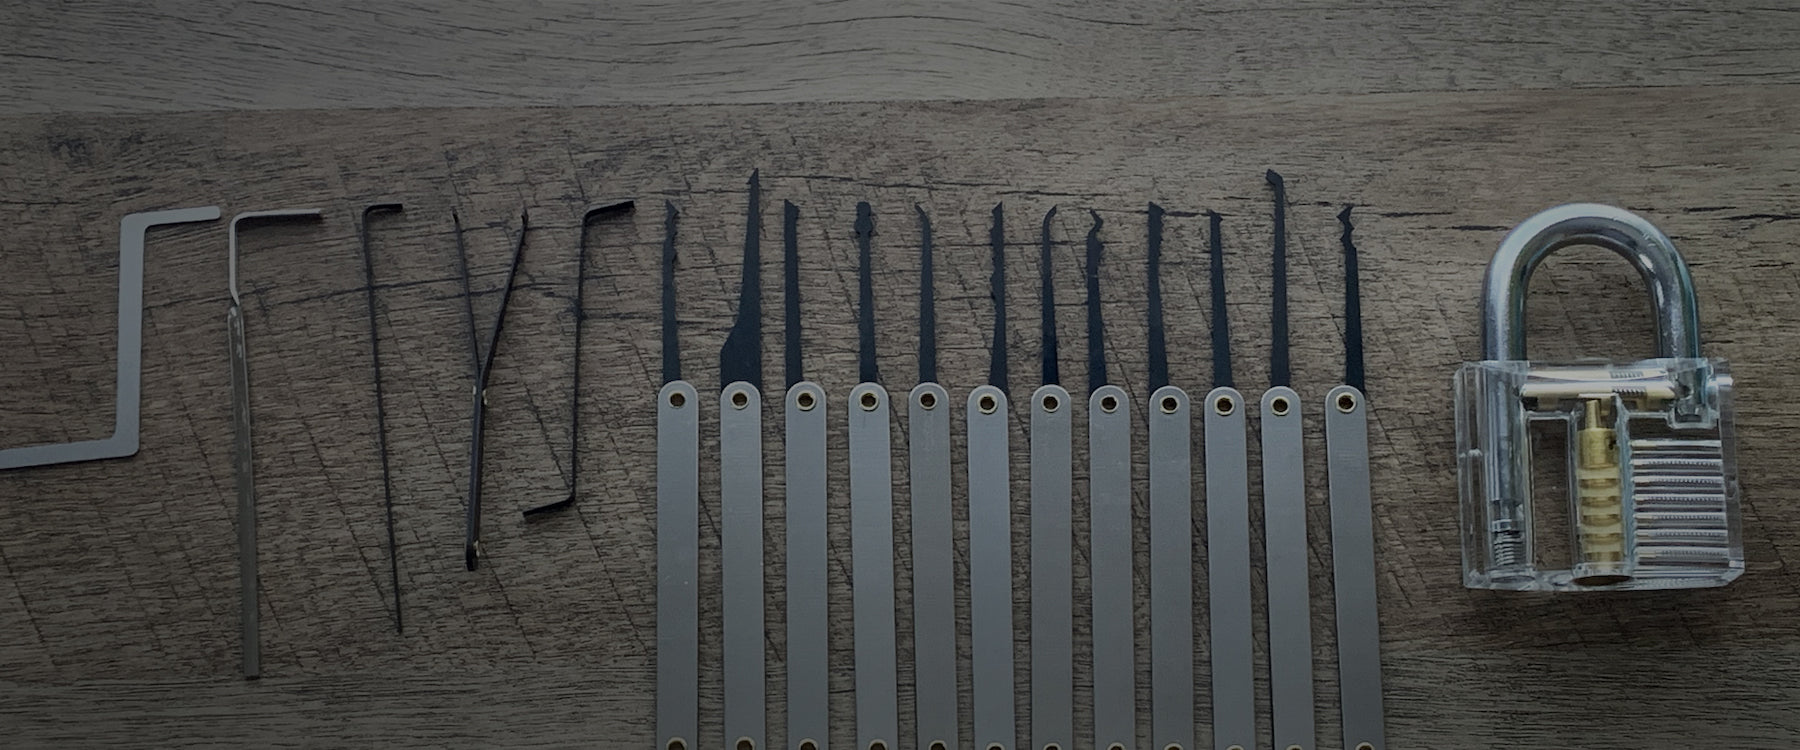 The best place for getting started with the art of lockpicking Lock Pick Genius